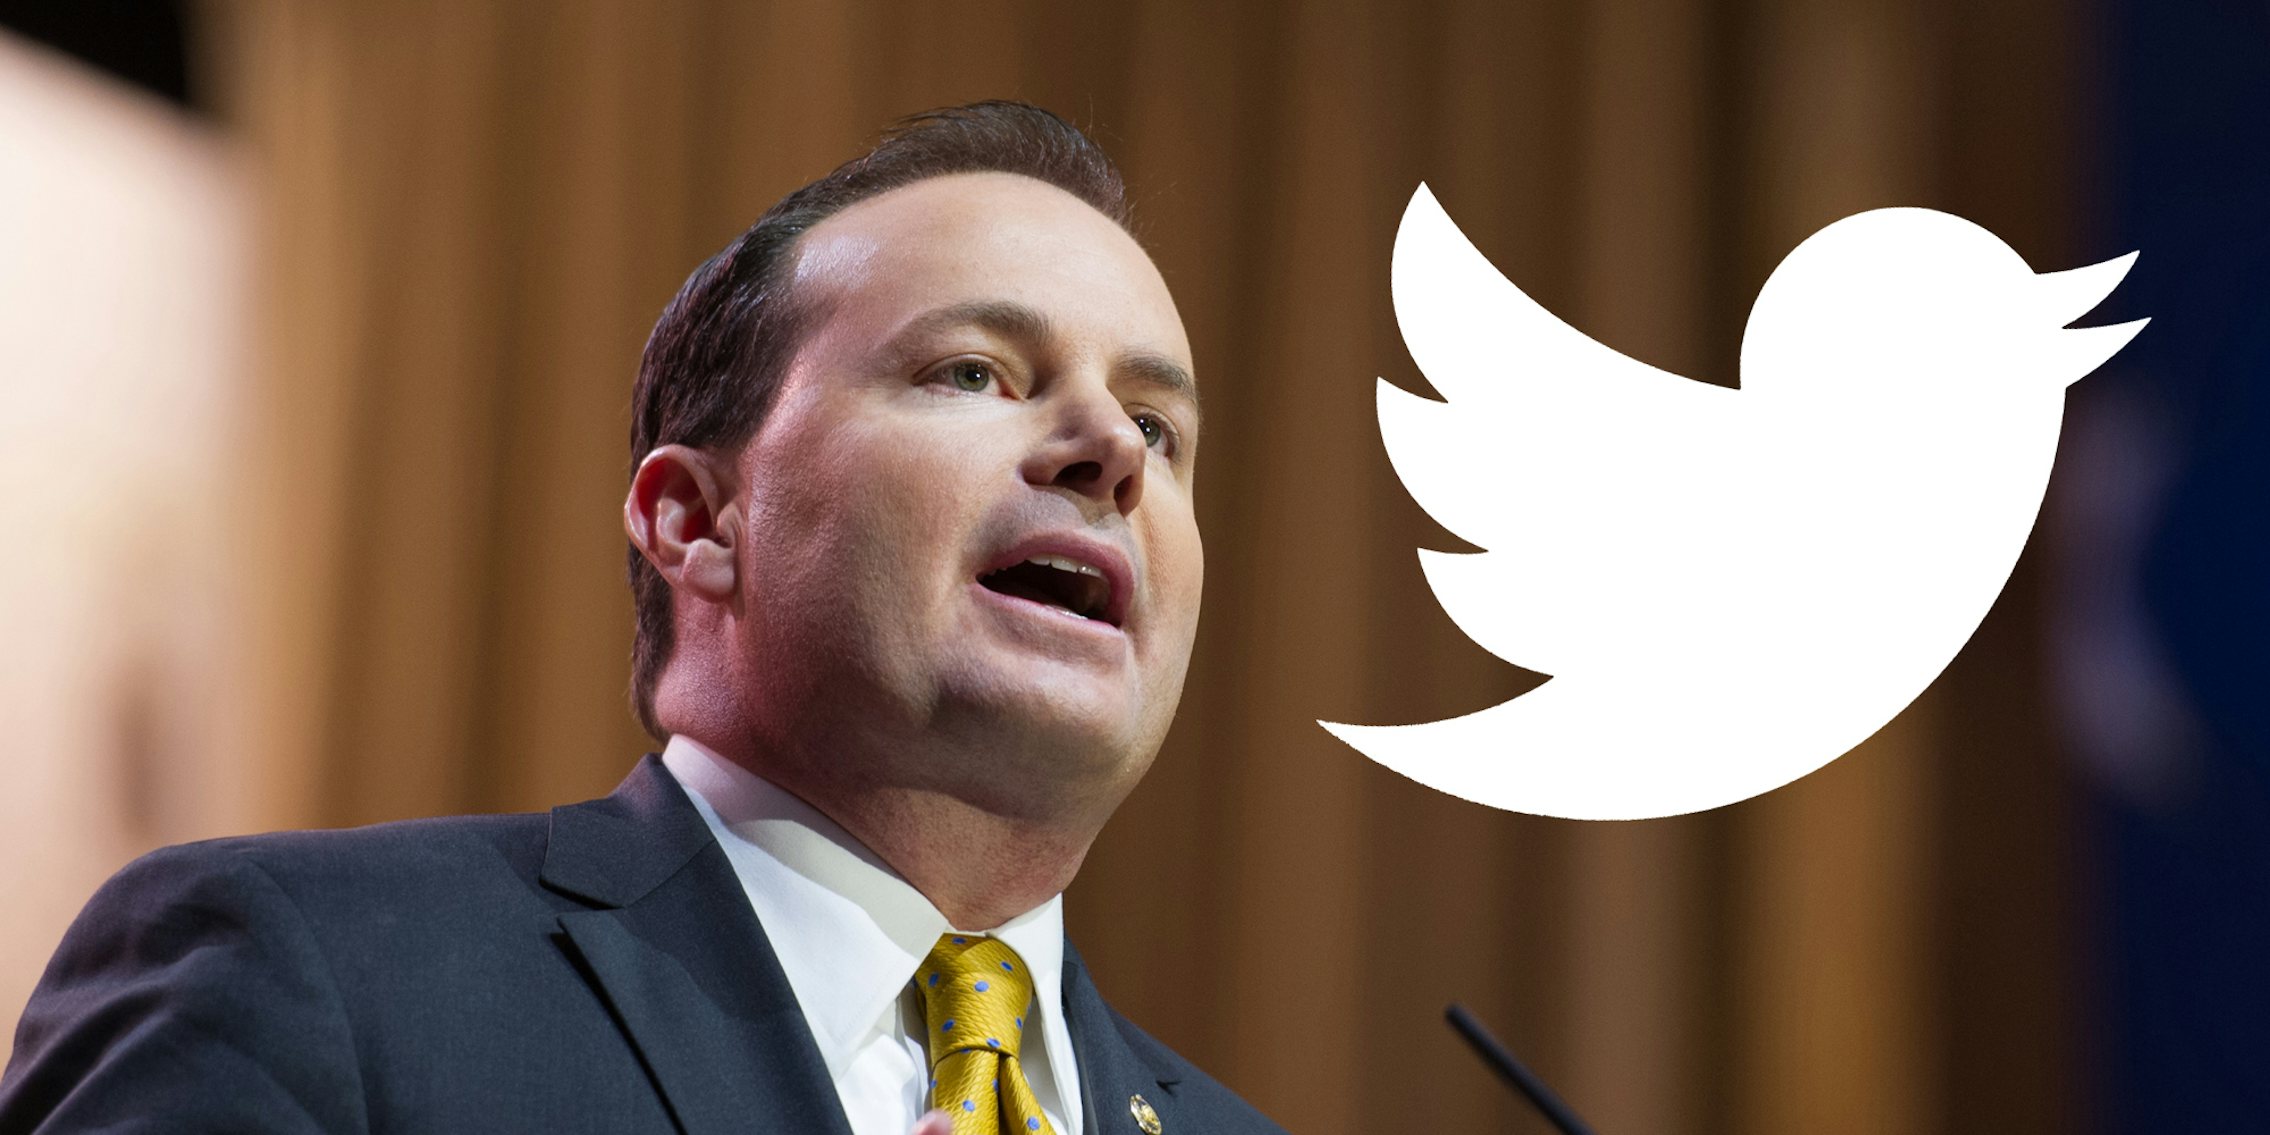 Mike Lee speaking into microphone with white Twitter bird logo to his right